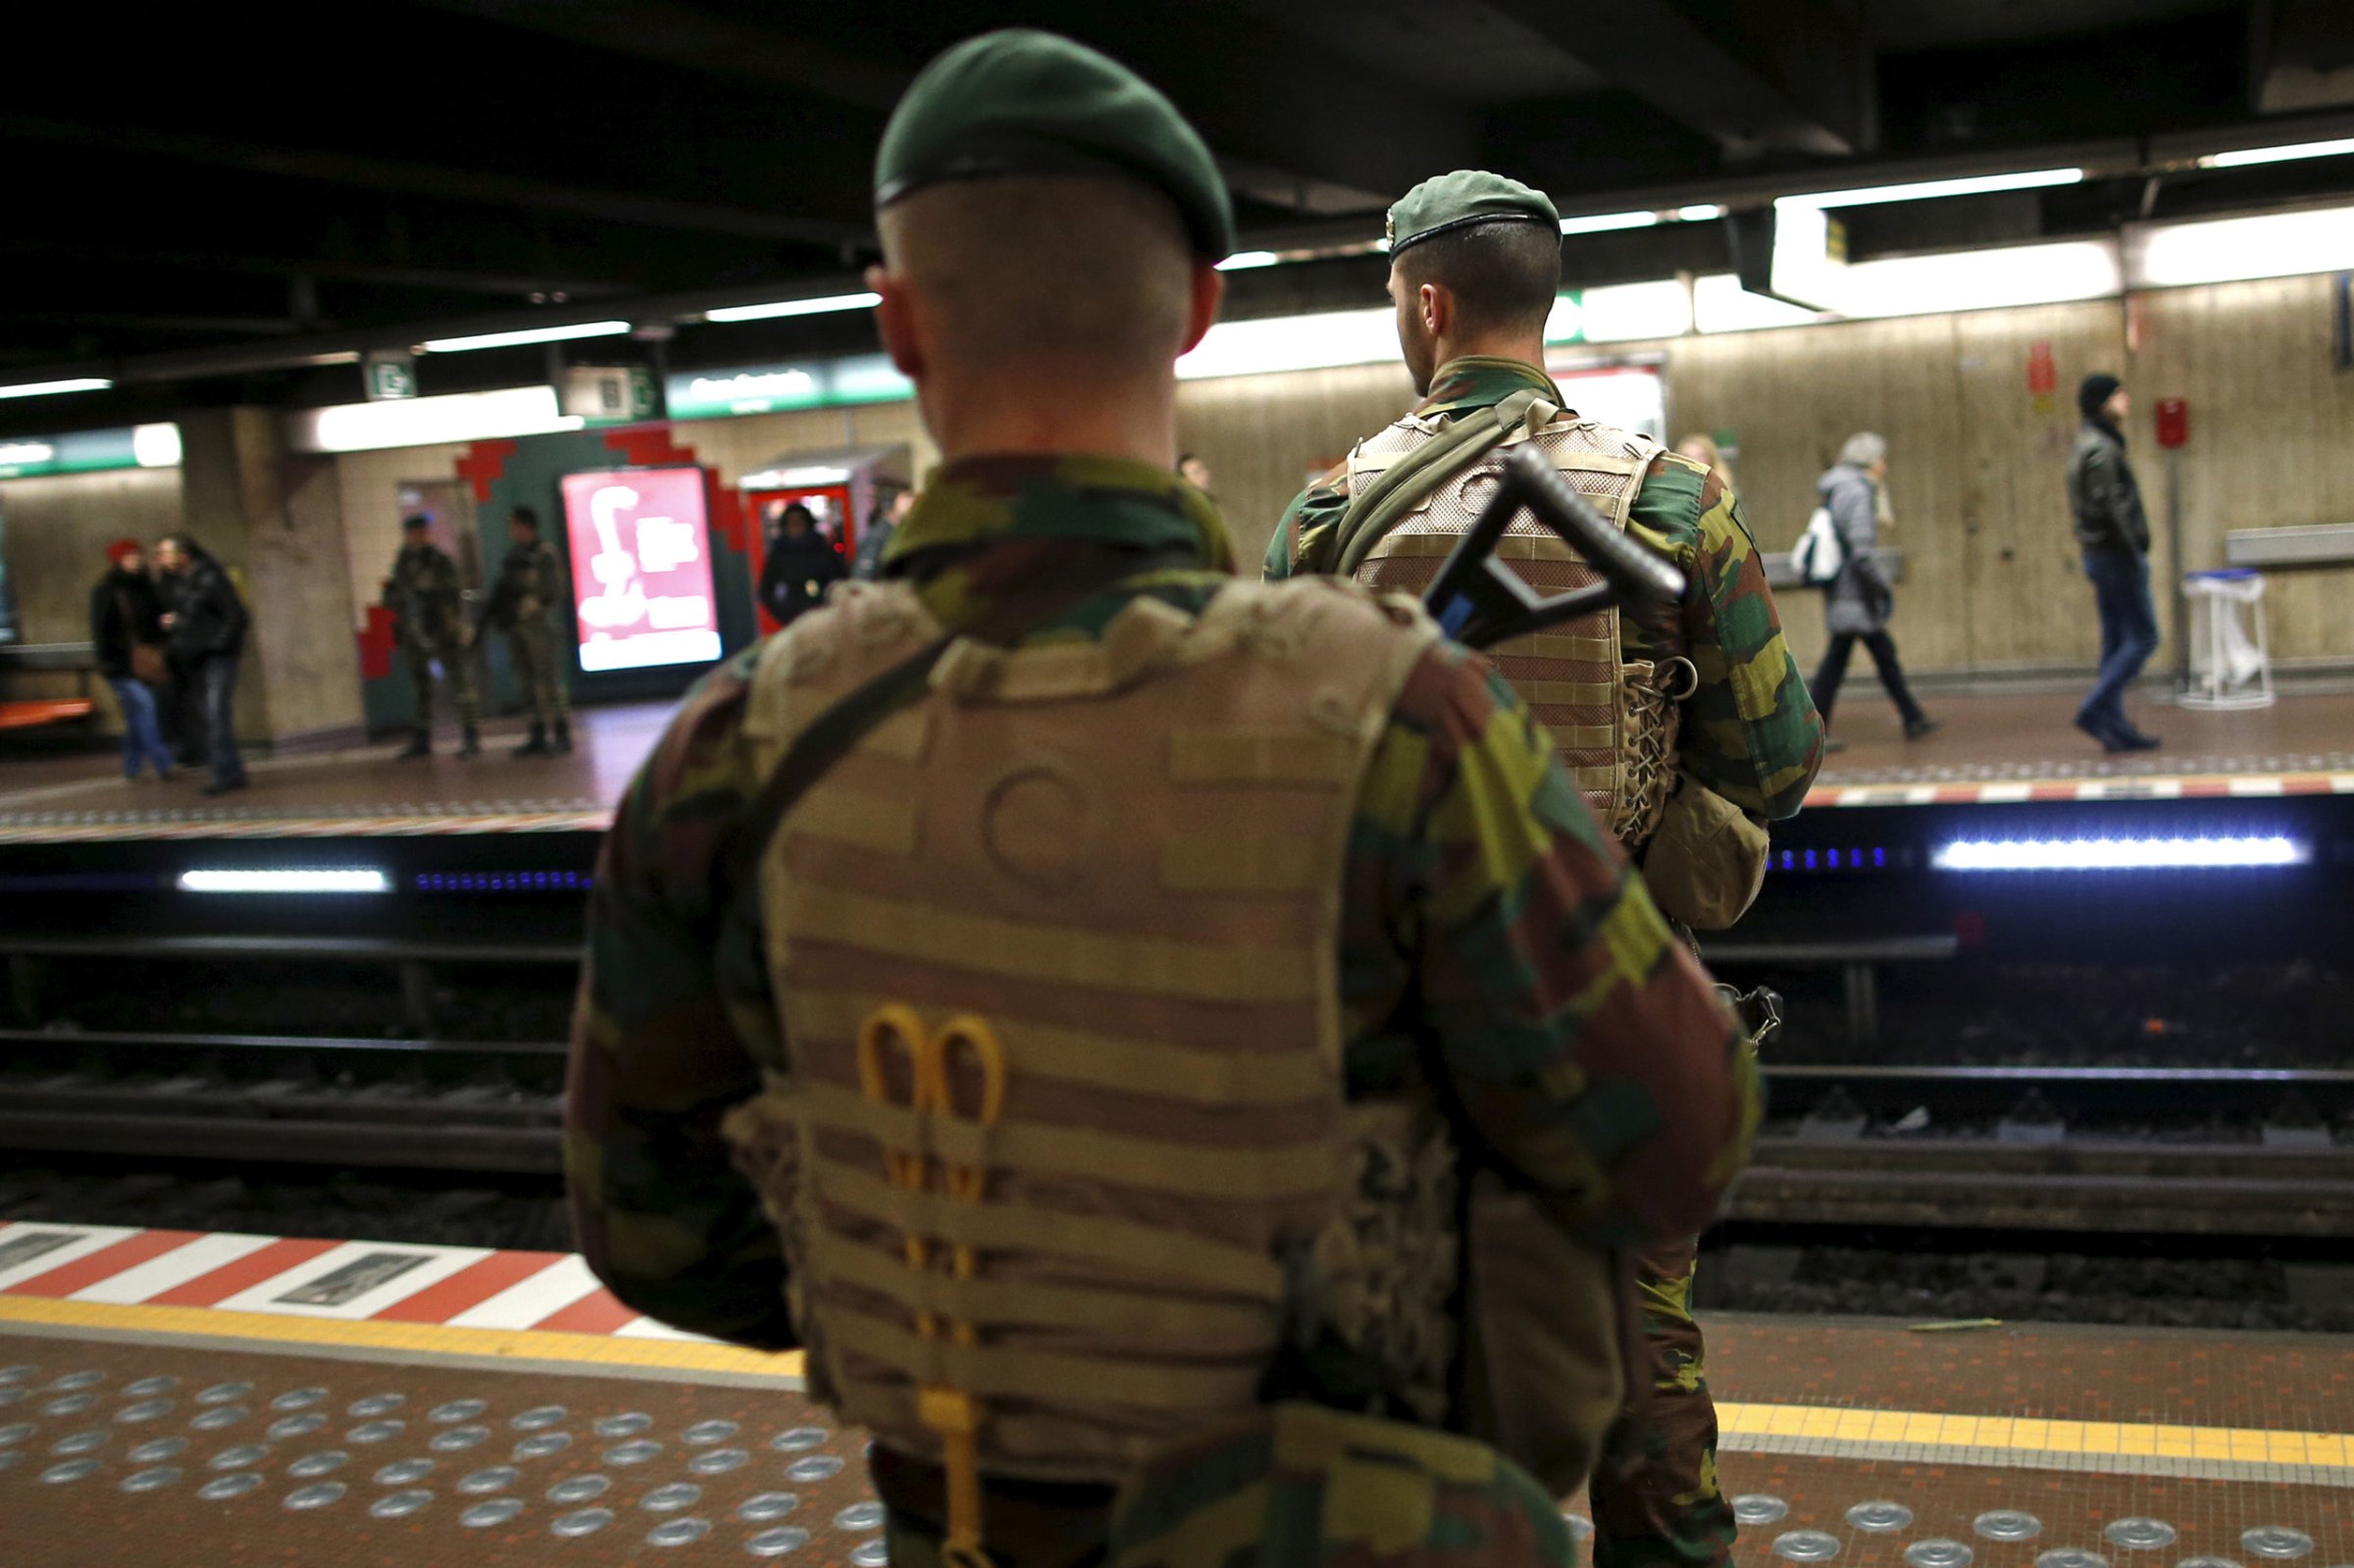 Belgian soldiers patrol at the Central Station subway stop in Brussels